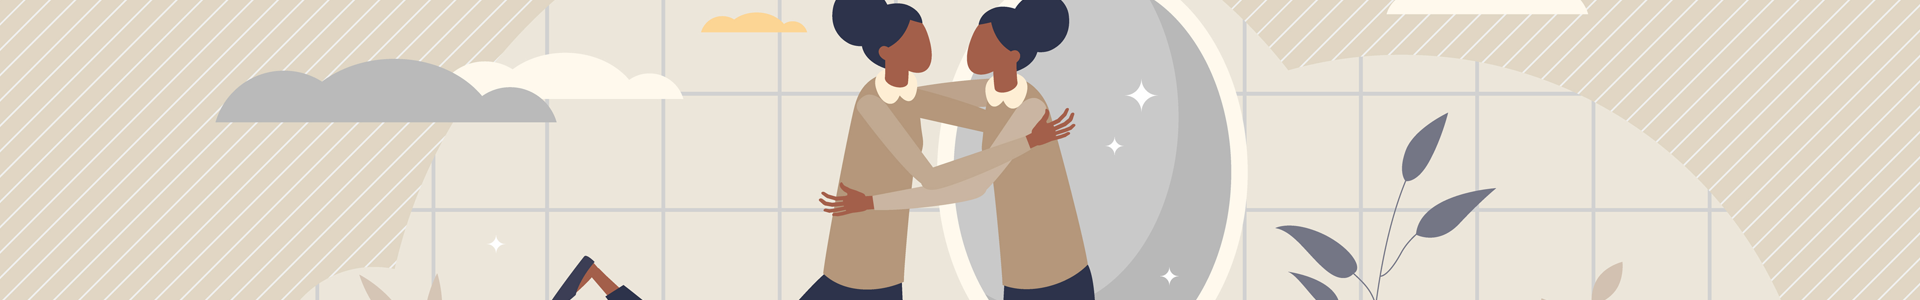 Illustration of a woman showing personal wellbeing by hugging her reflection